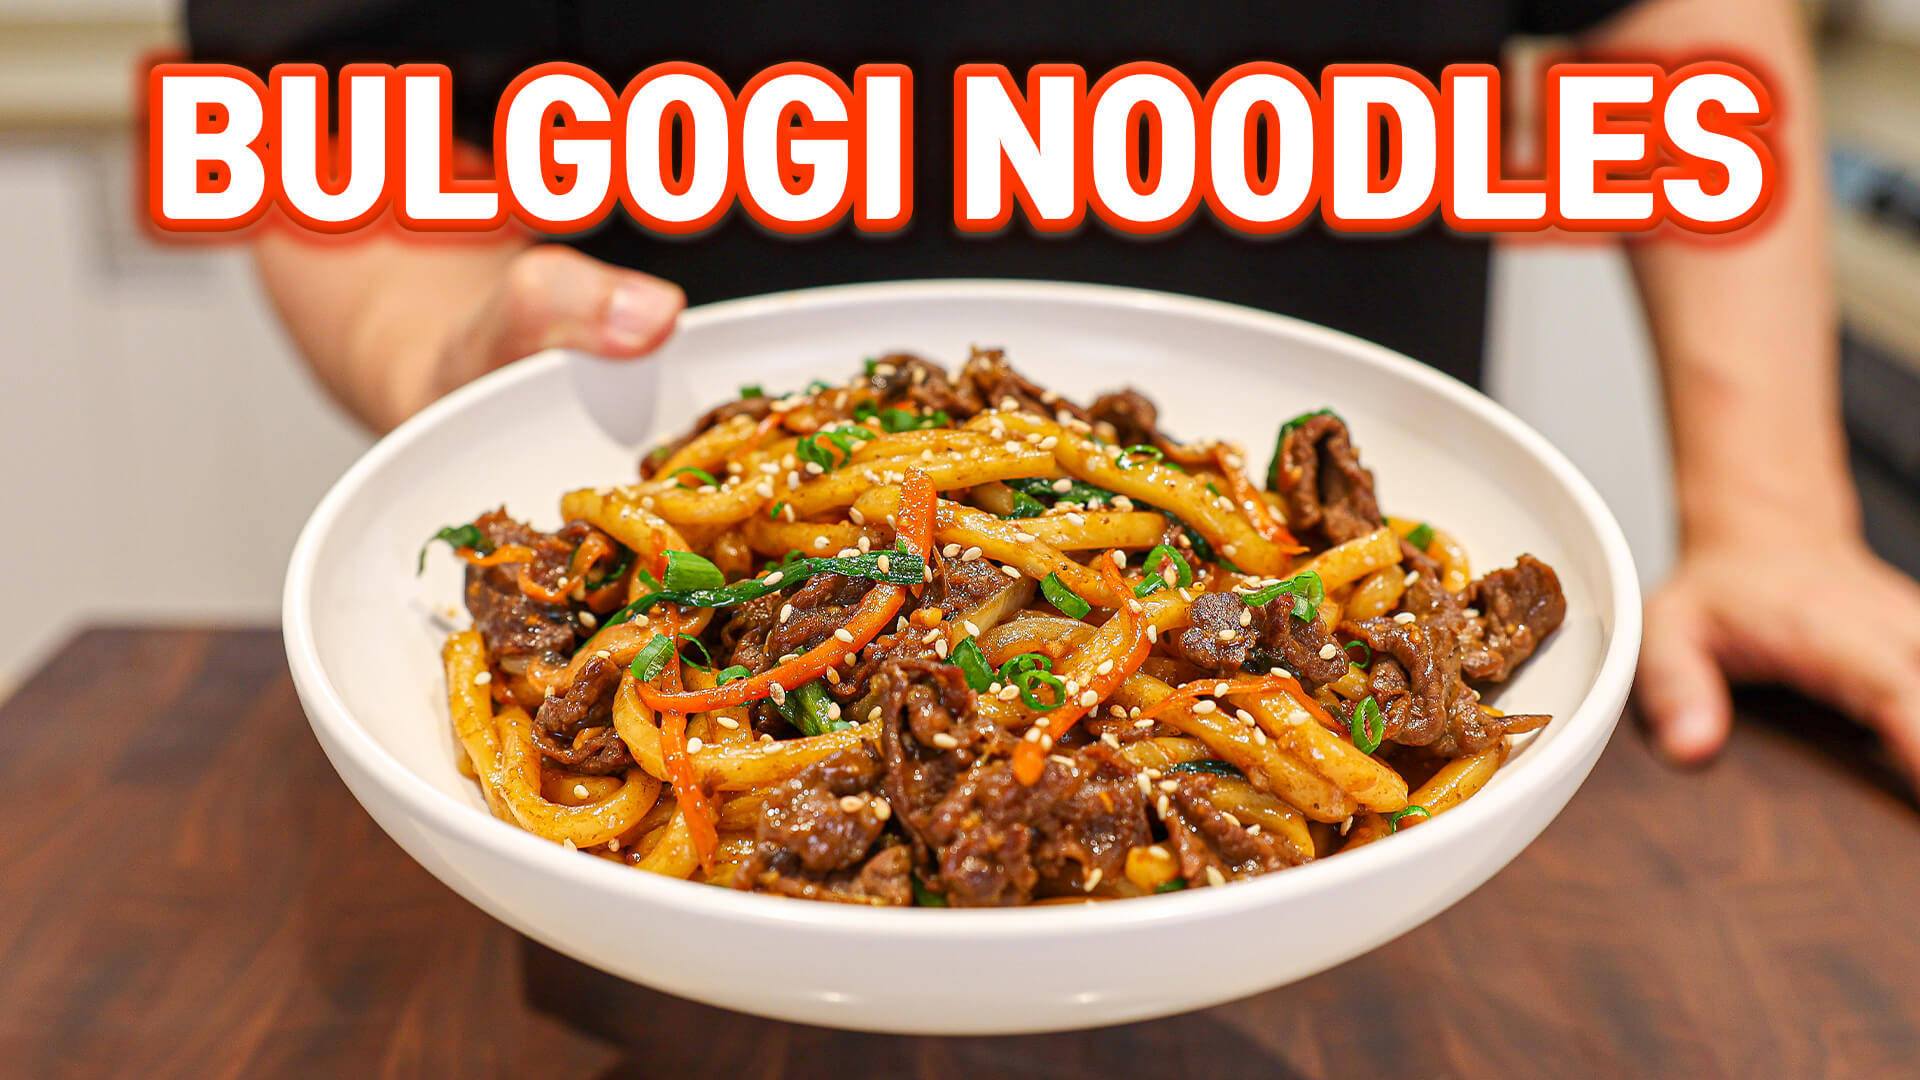 Bulgoginoodles Beef In Italian Can Be Translated As 